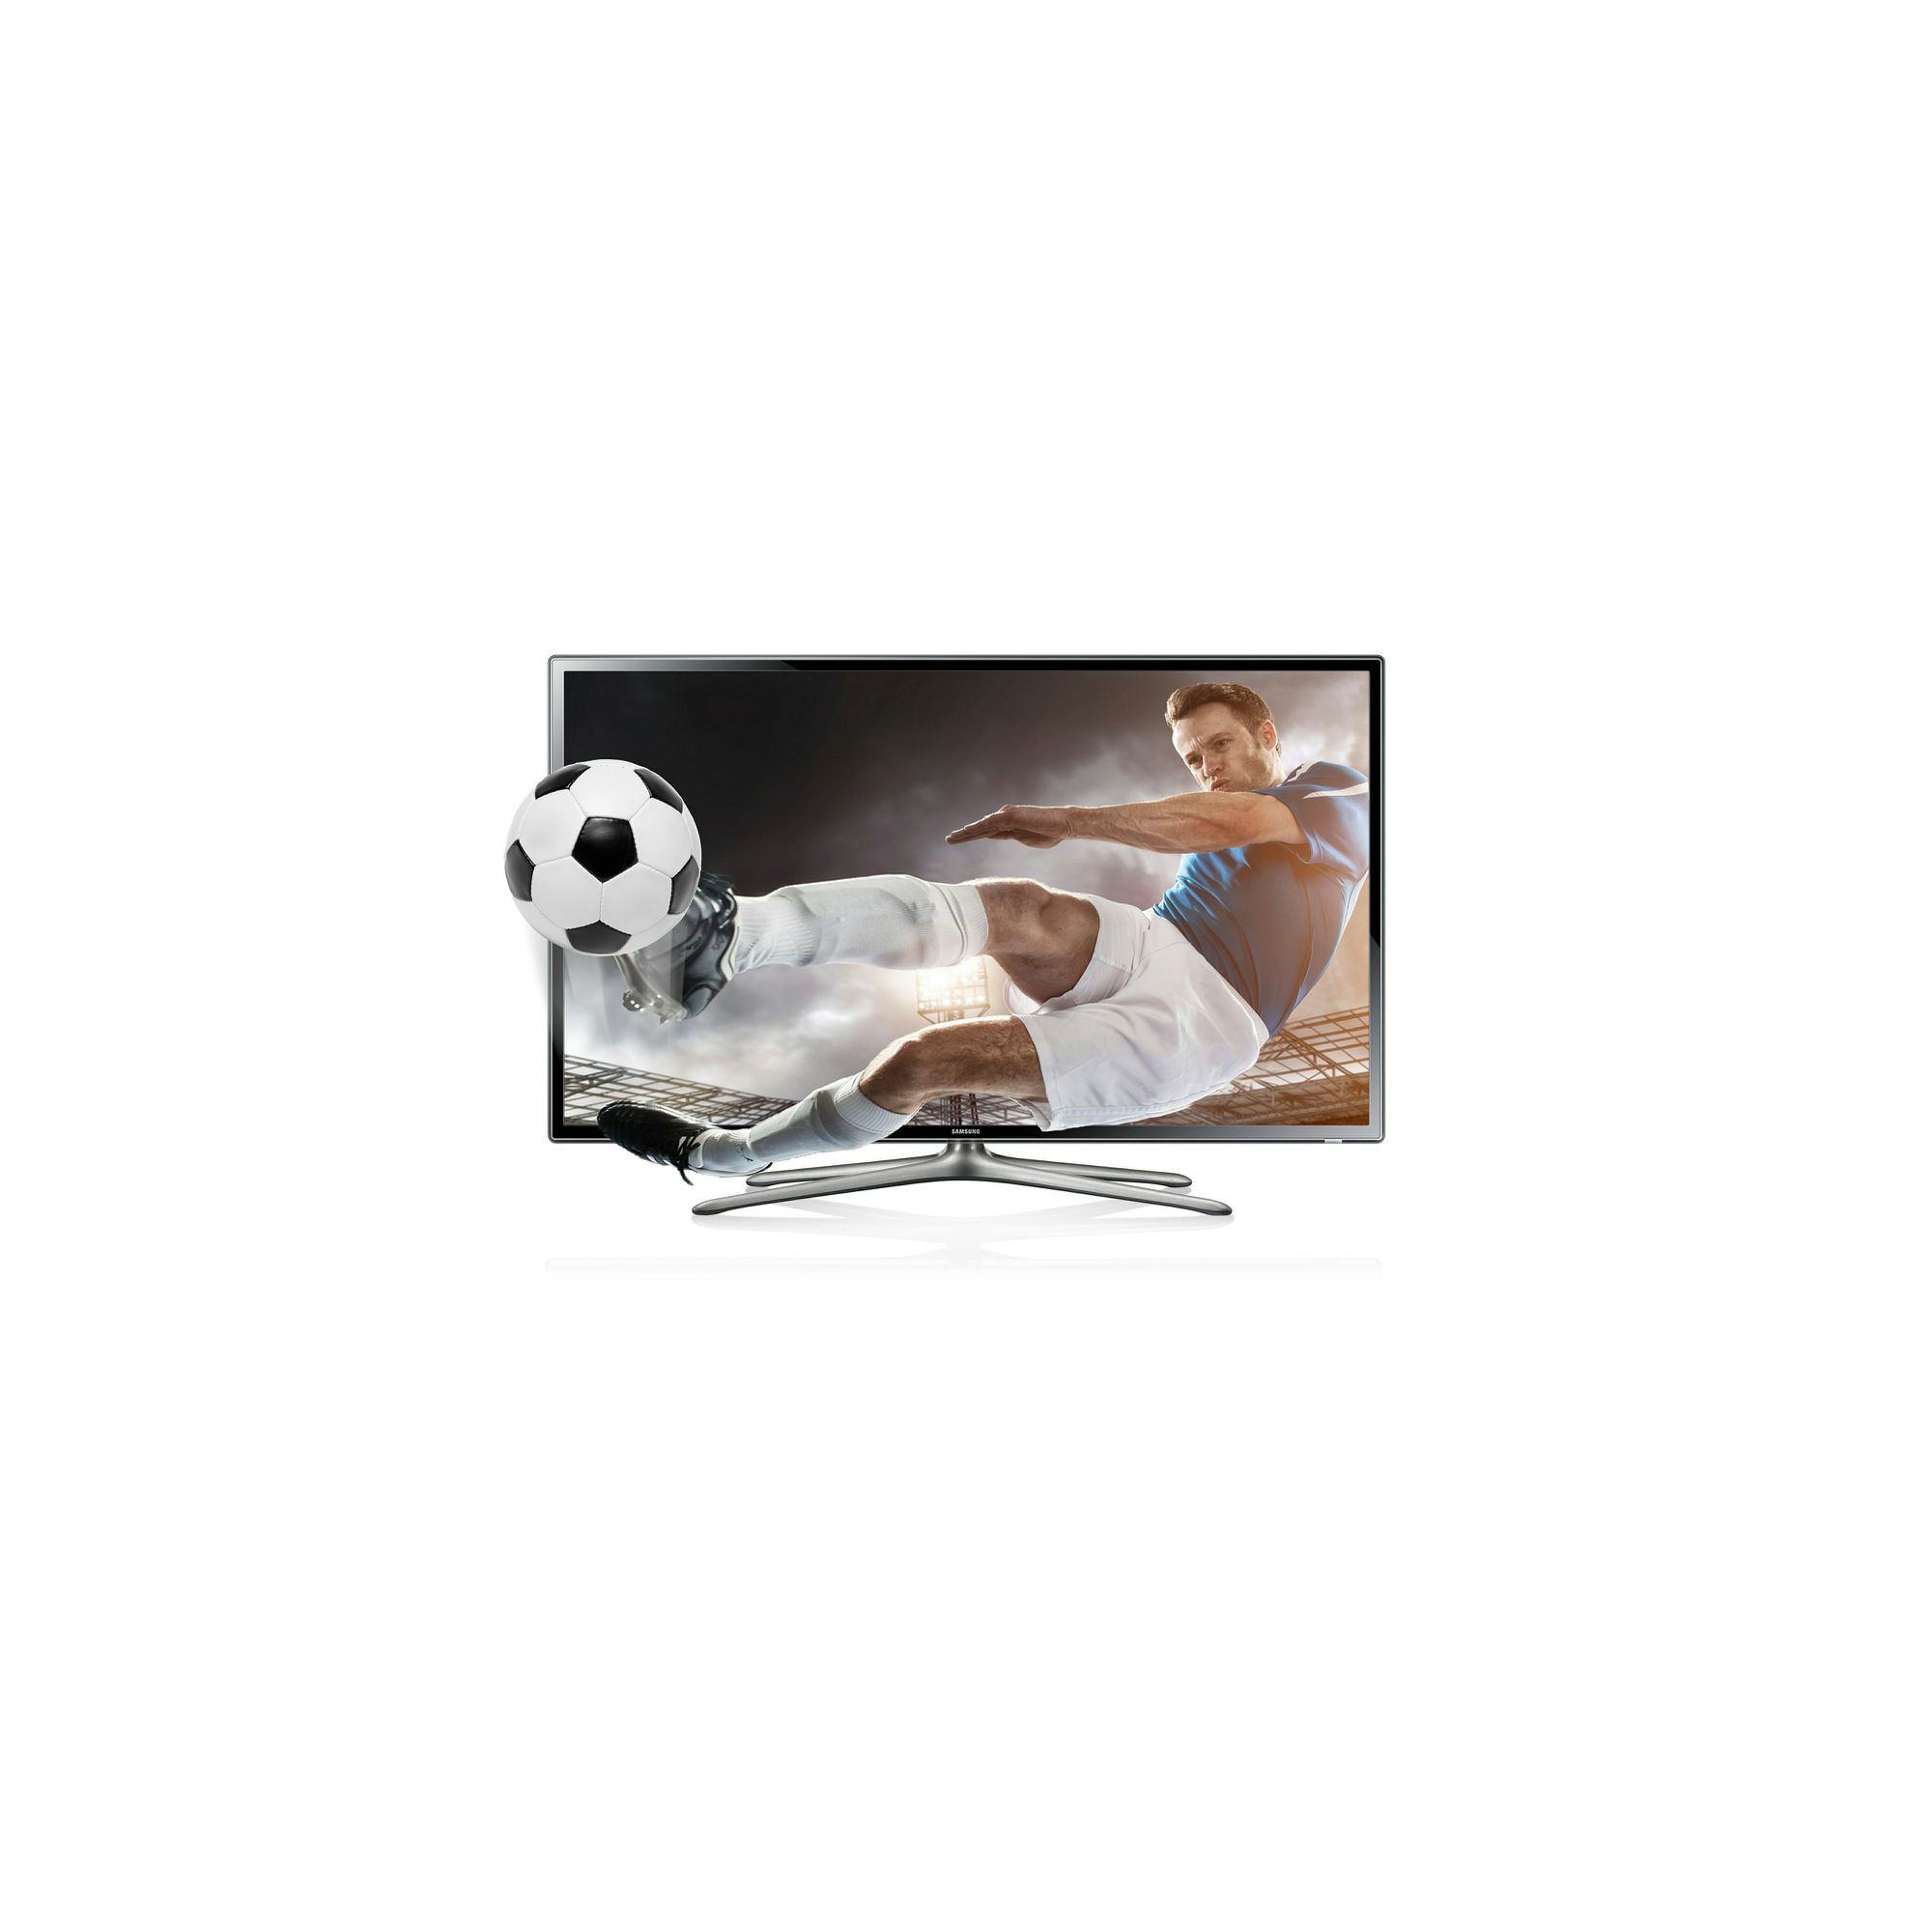 Samsung UE60F6100 60 inch Full HD 1080p LED TV with Freeview